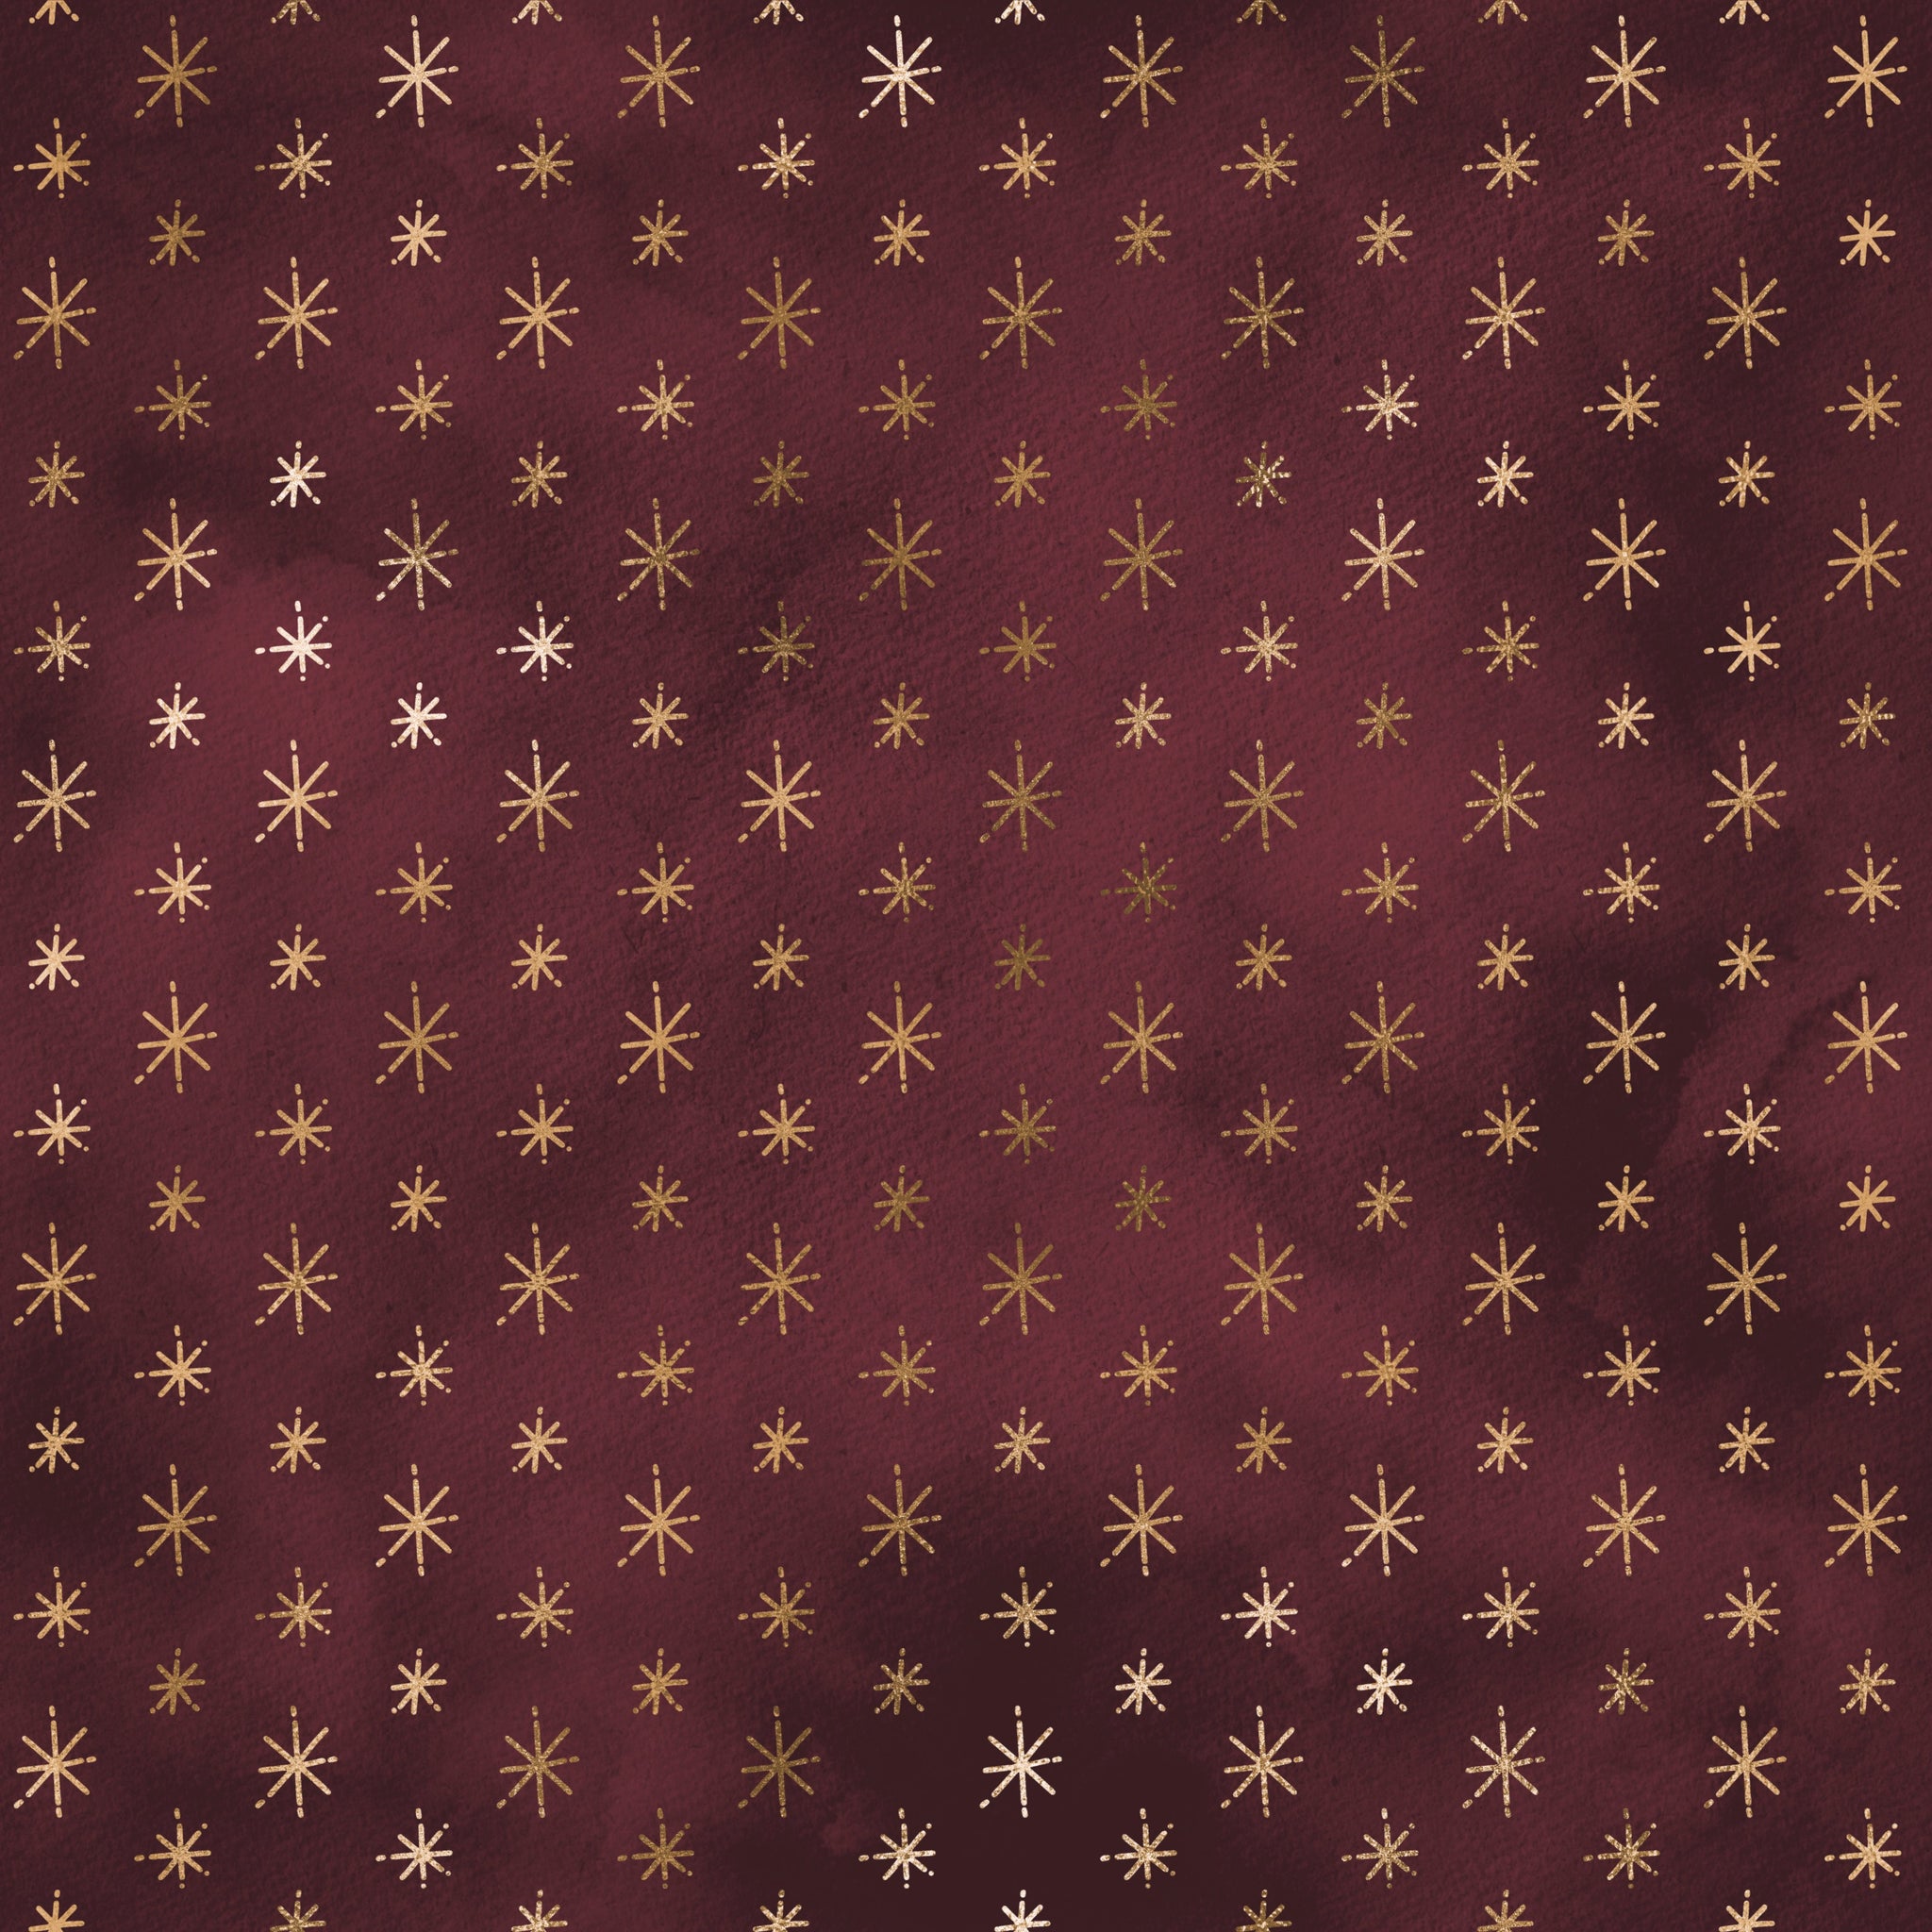 Steampunk Christmas Paper 2